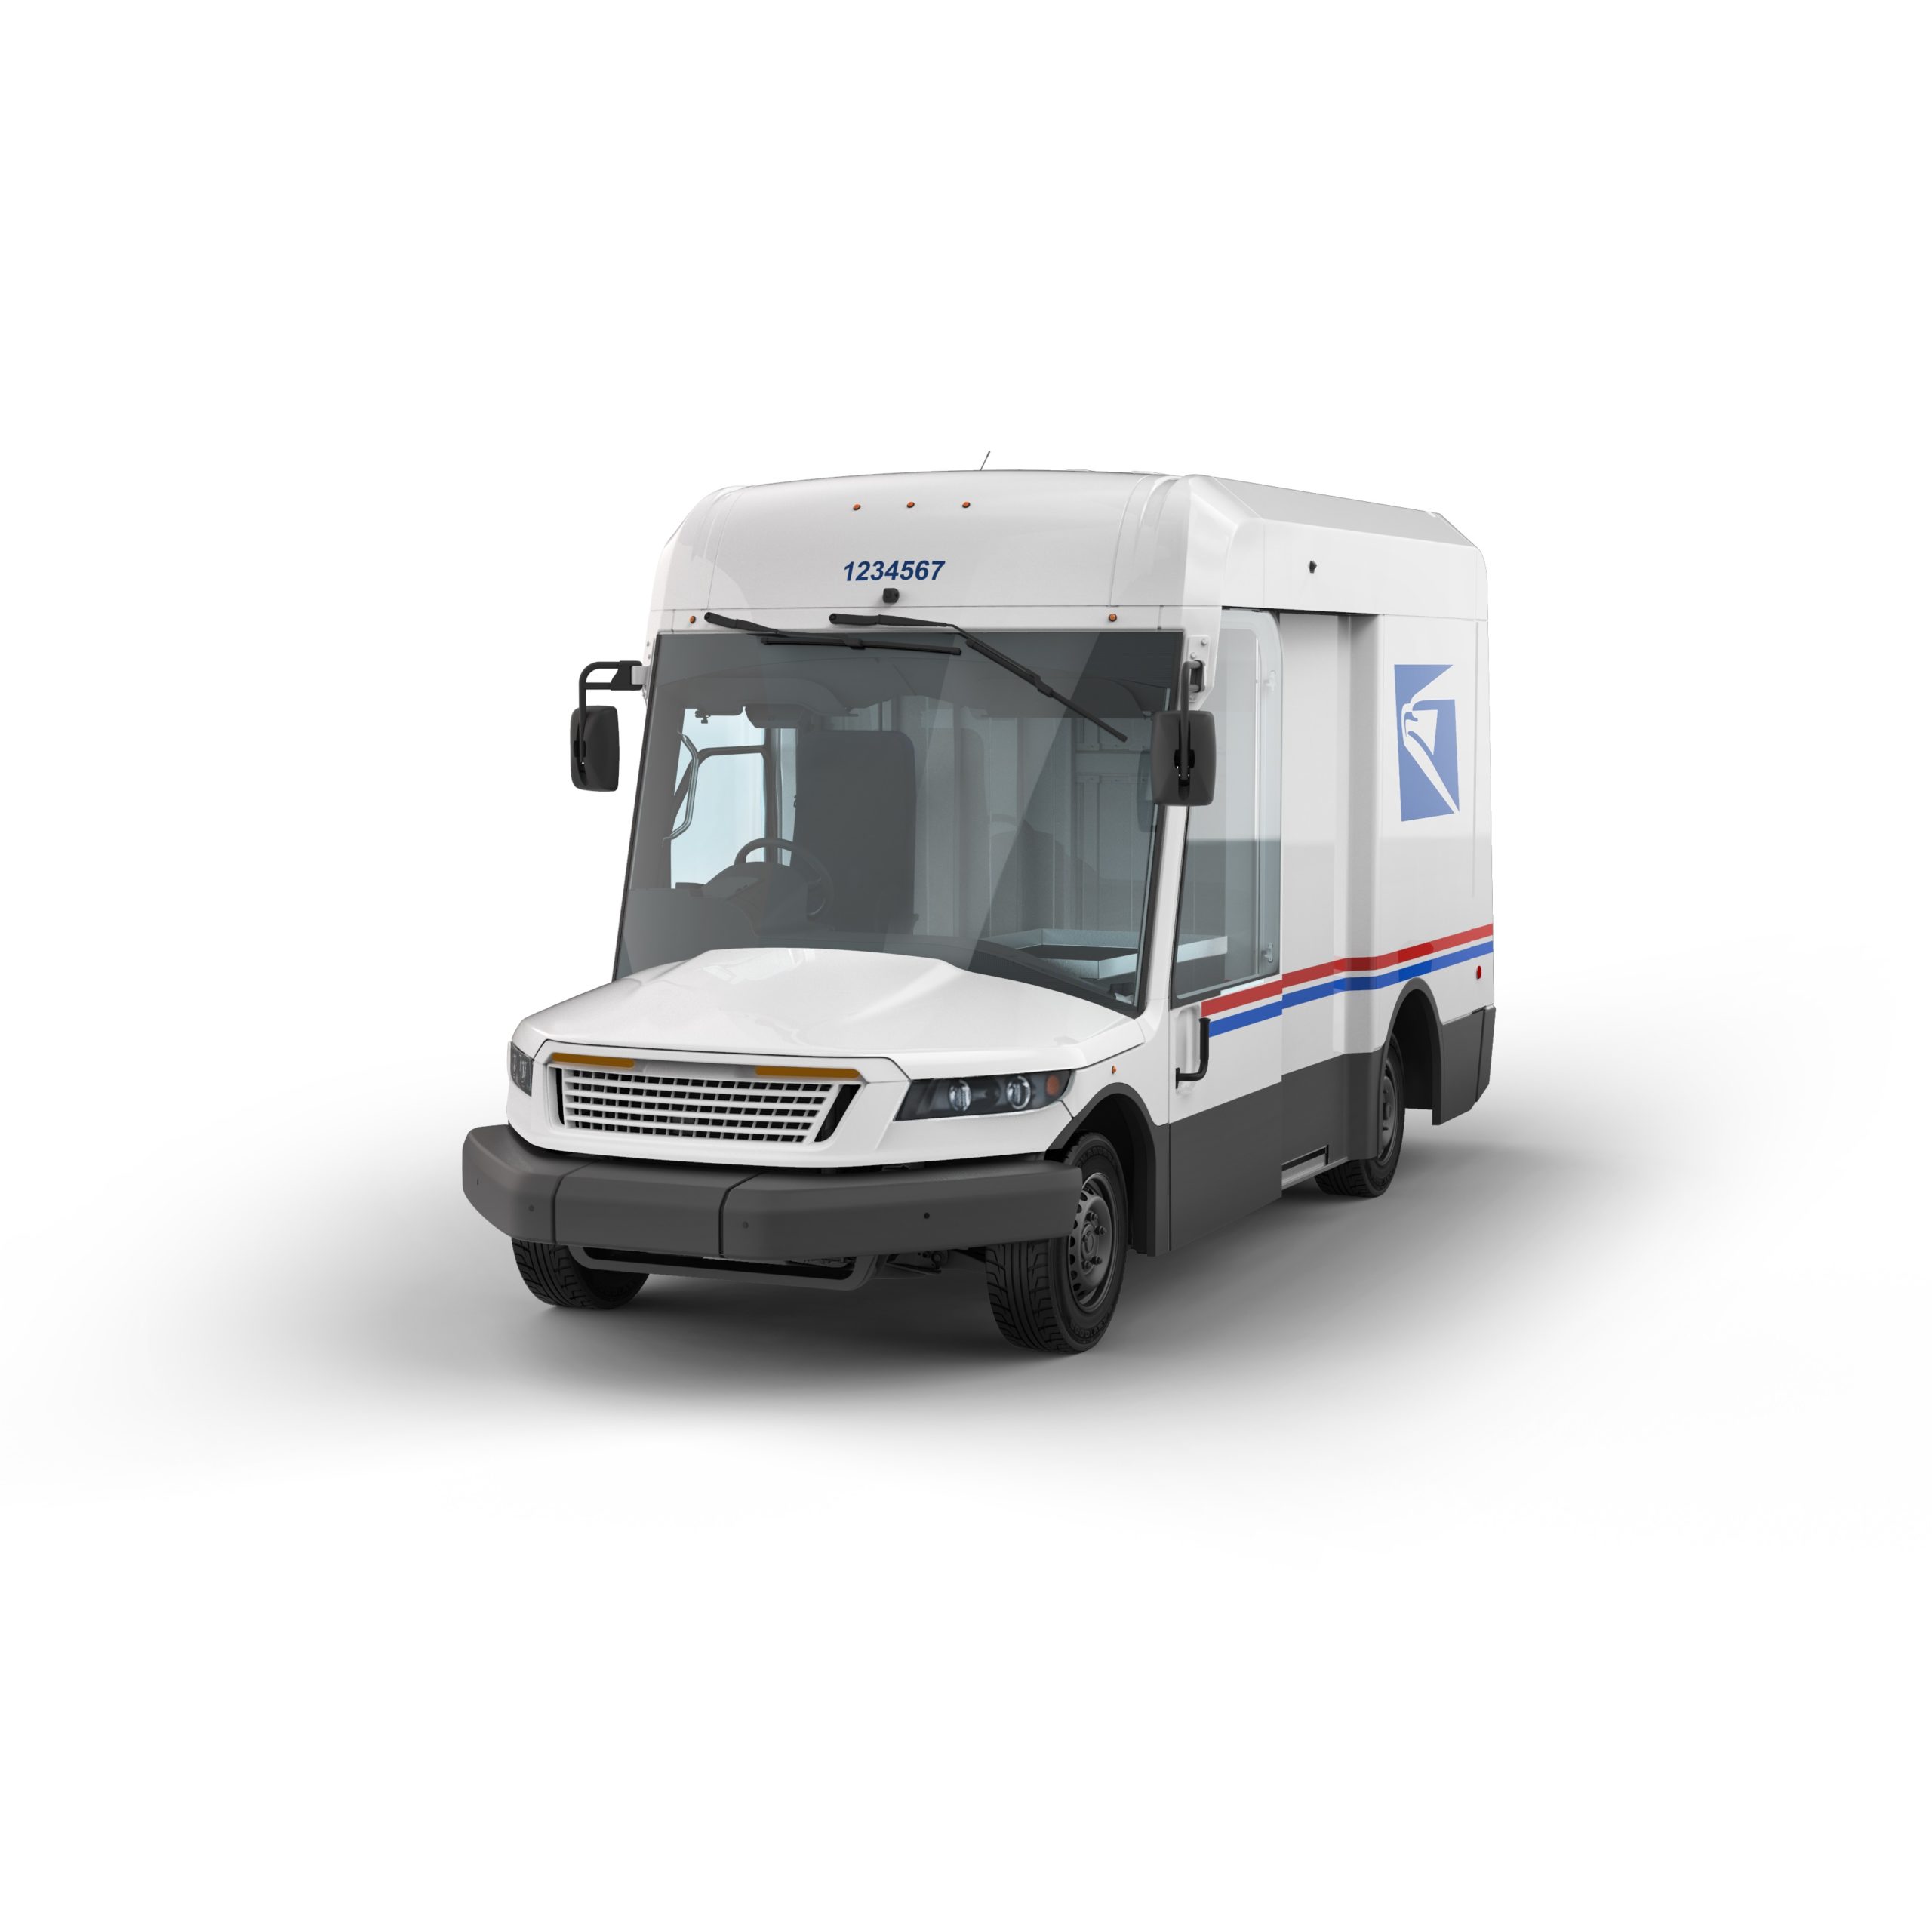 Nextgen USPS mail trucks are only capable of 8.6 mpg, EPA says ctm